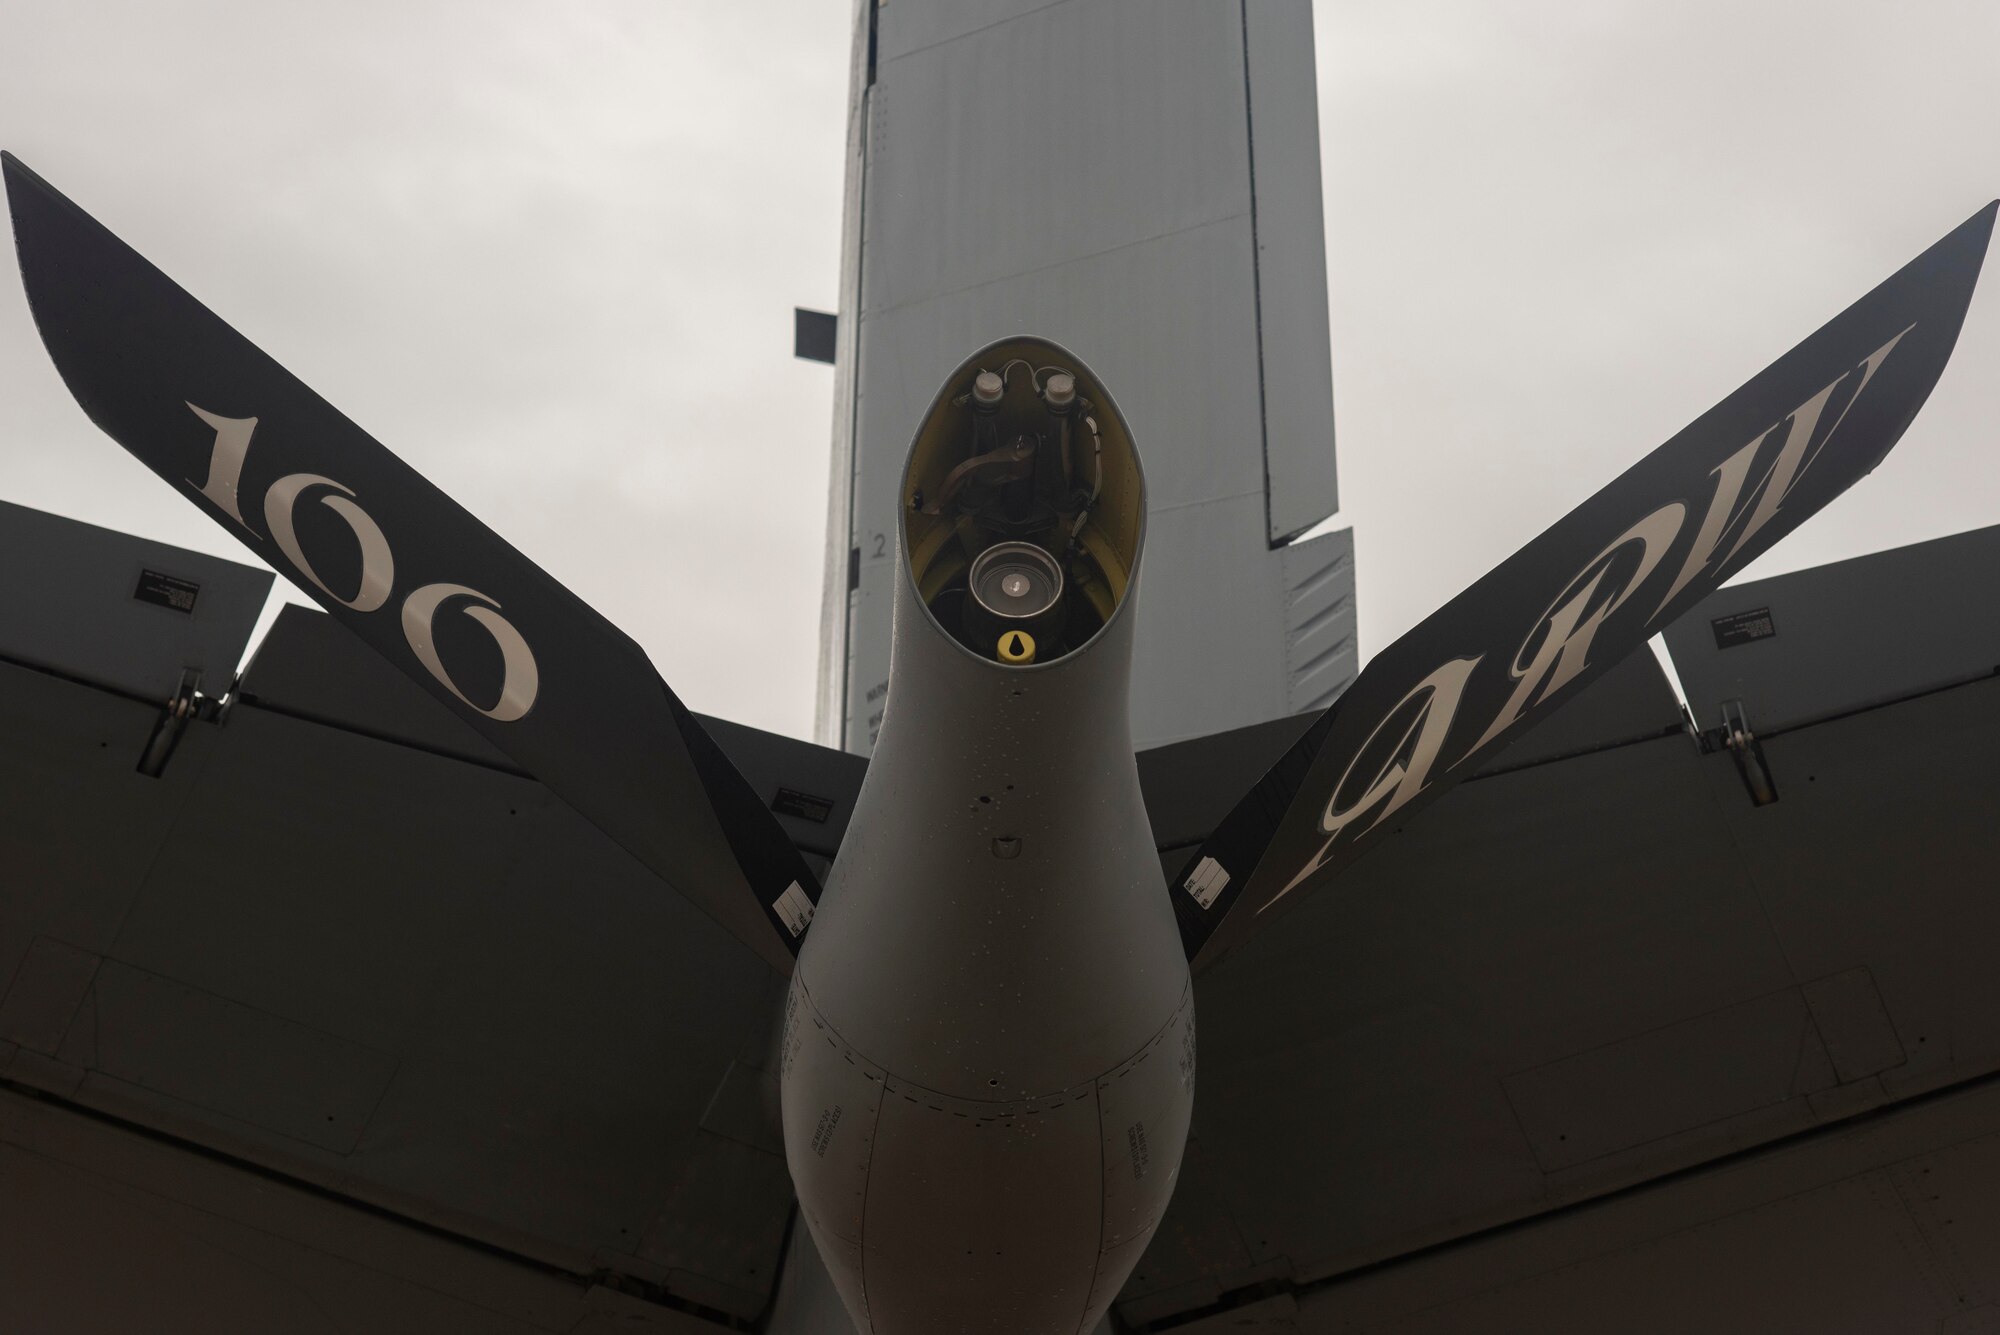 A 100th Air Refueling Wing KC-135 Stratotanker aircraft sits on the flightline prior to a training mission at Royal Air Force Mildenhall, England, Aug. 19, 2020. The flying boom supports the delivery of fuel to aircraft in flight and extends the range of U.S. Air Force, allied and partner nation aircraft. (U.S. Air Force photo by Airman 1st Class Joseph Barron)